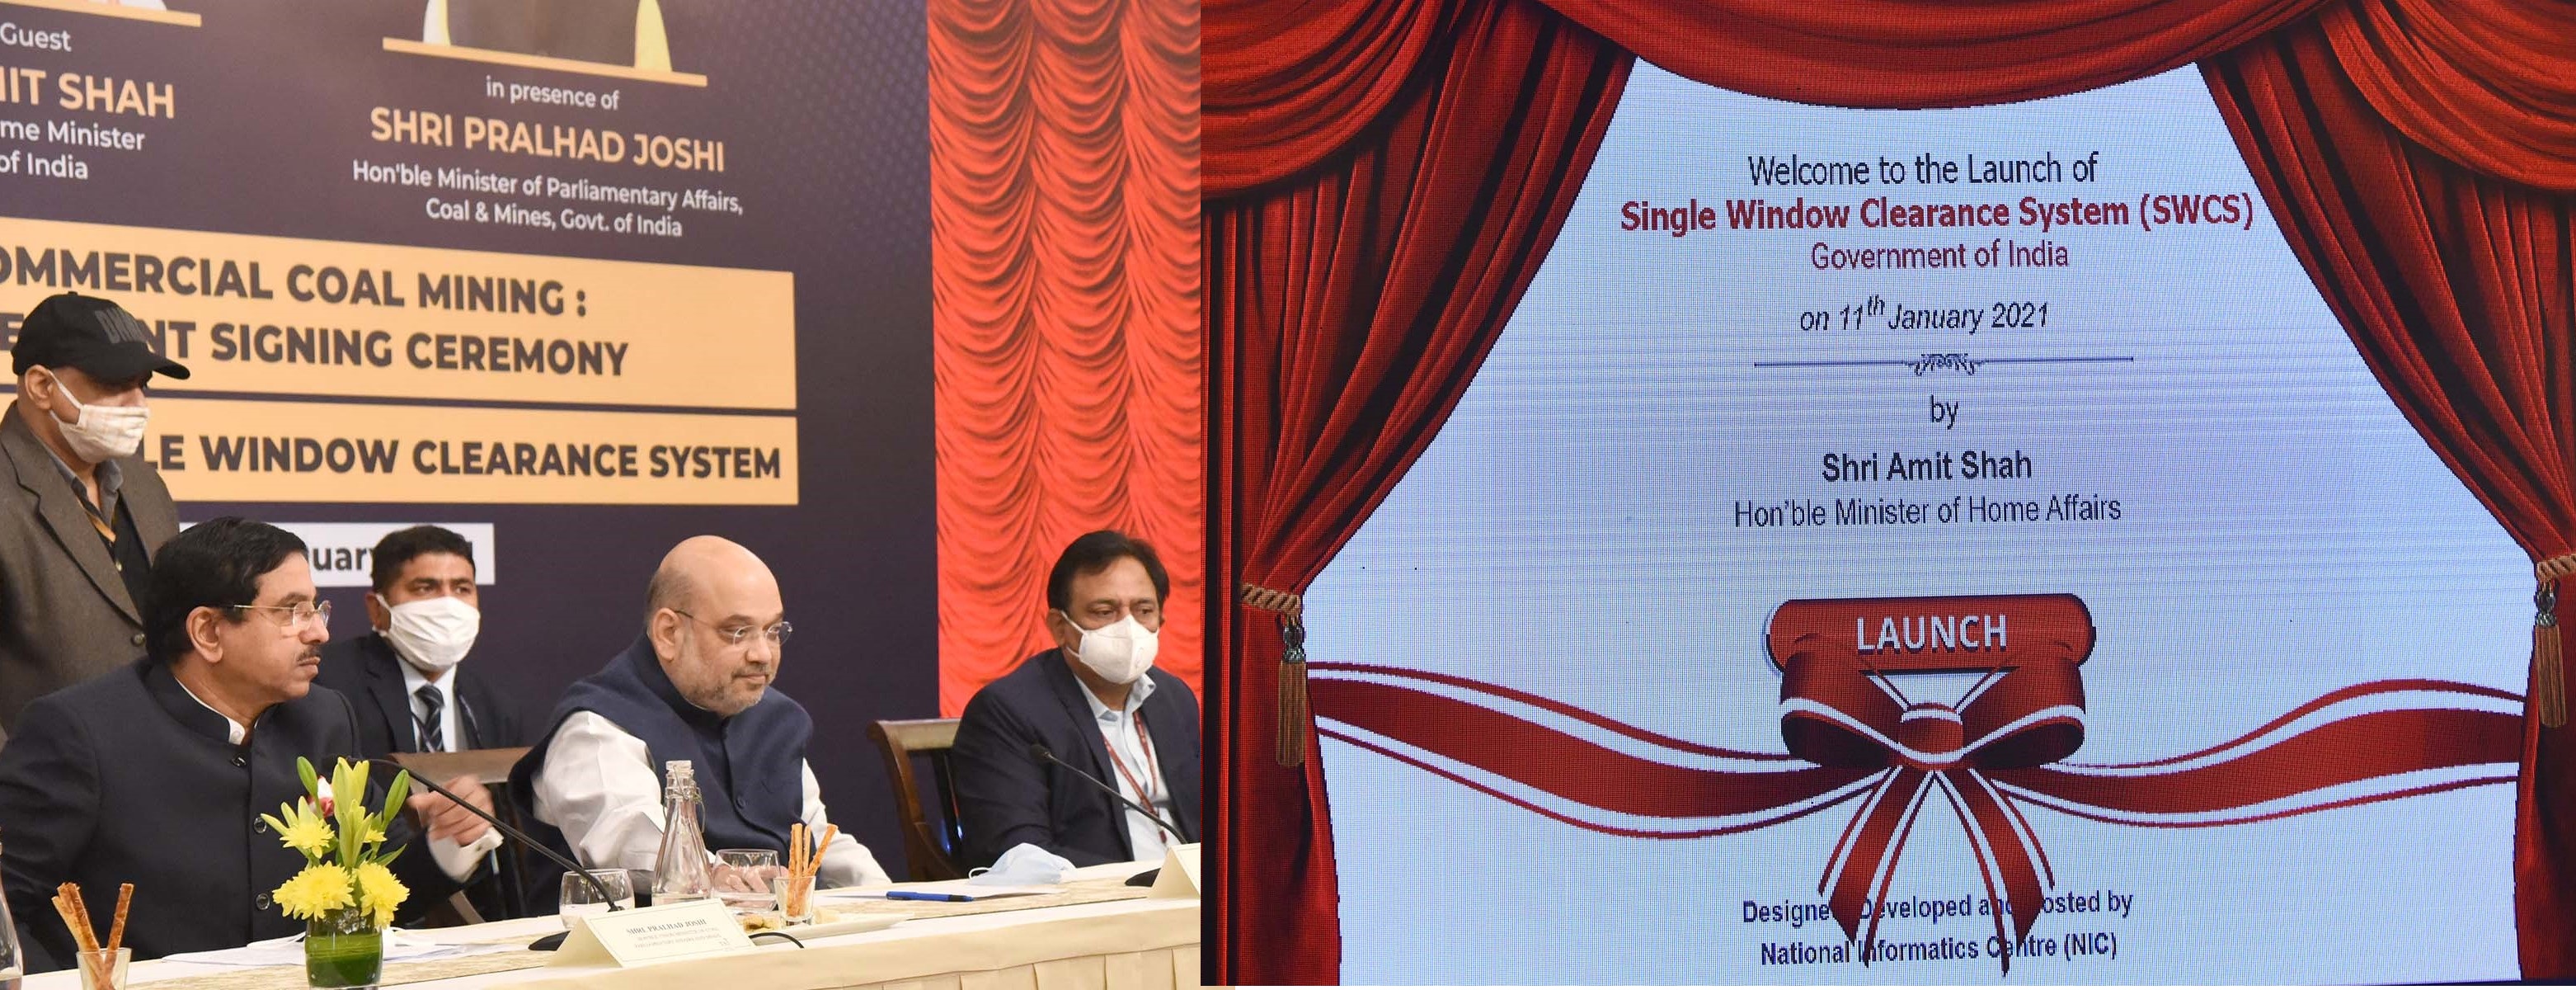 Launch of Single Window Clearance System(SWCS)